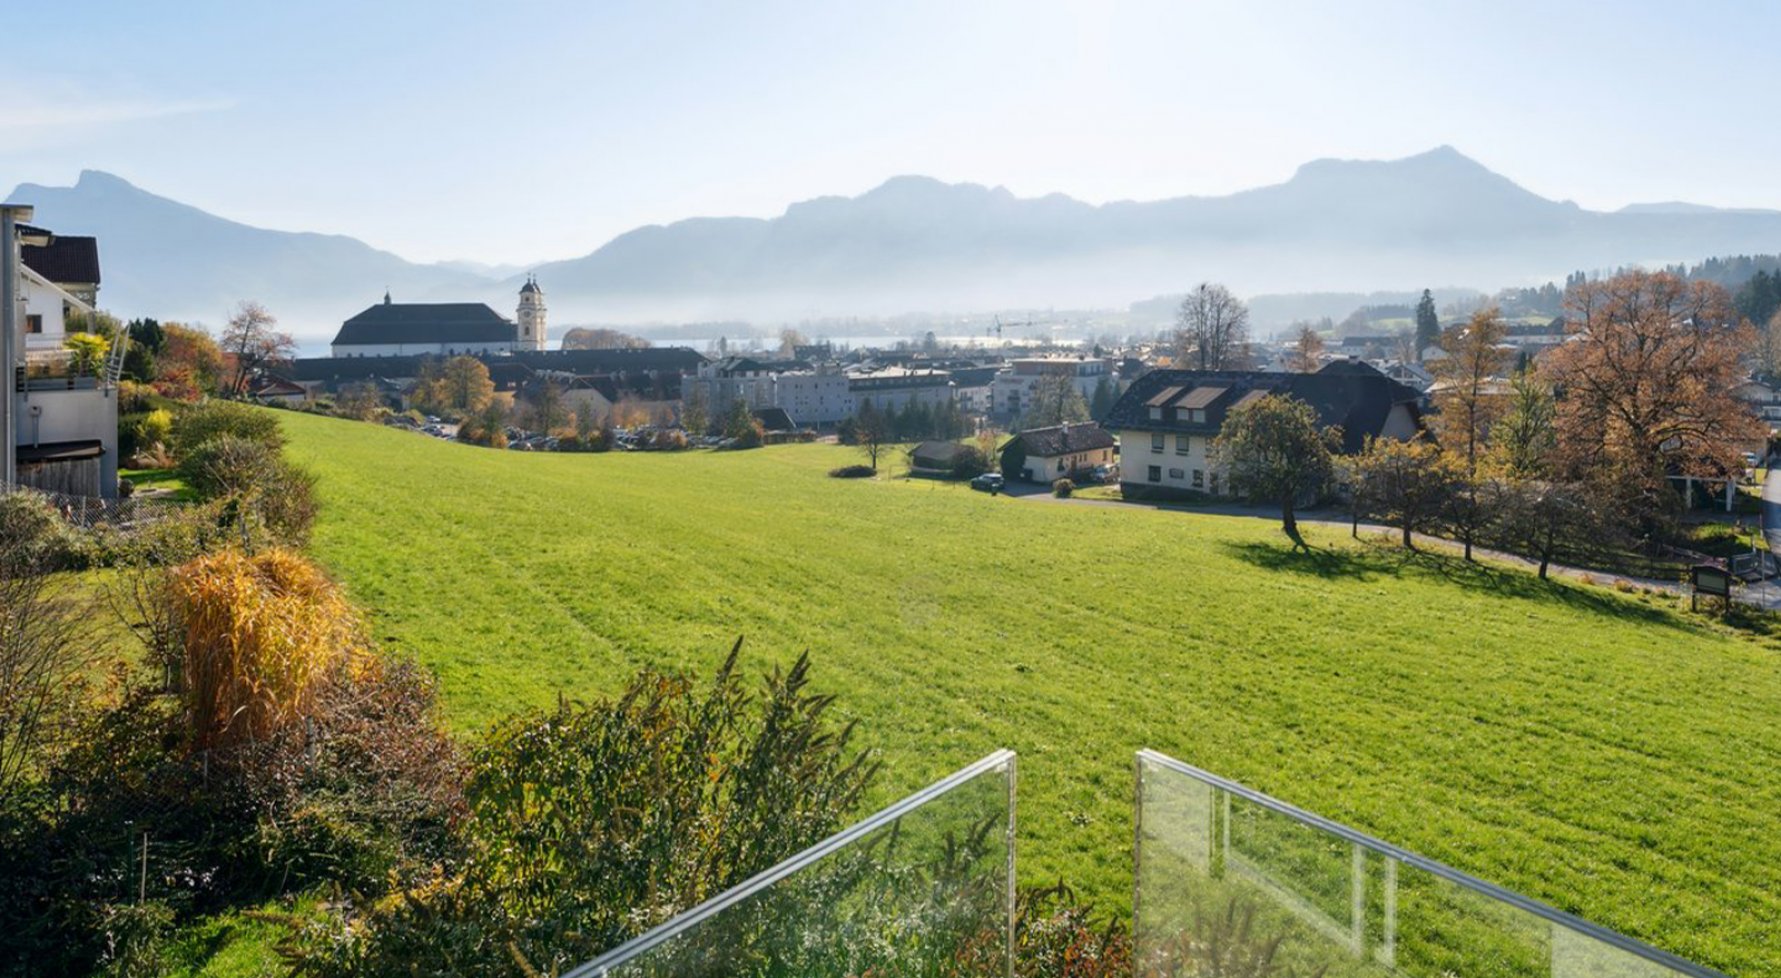 Property in 5310 Mondsee: Welcome to Mondsee! Timeless villa with combined lake and mountain views - picture 1